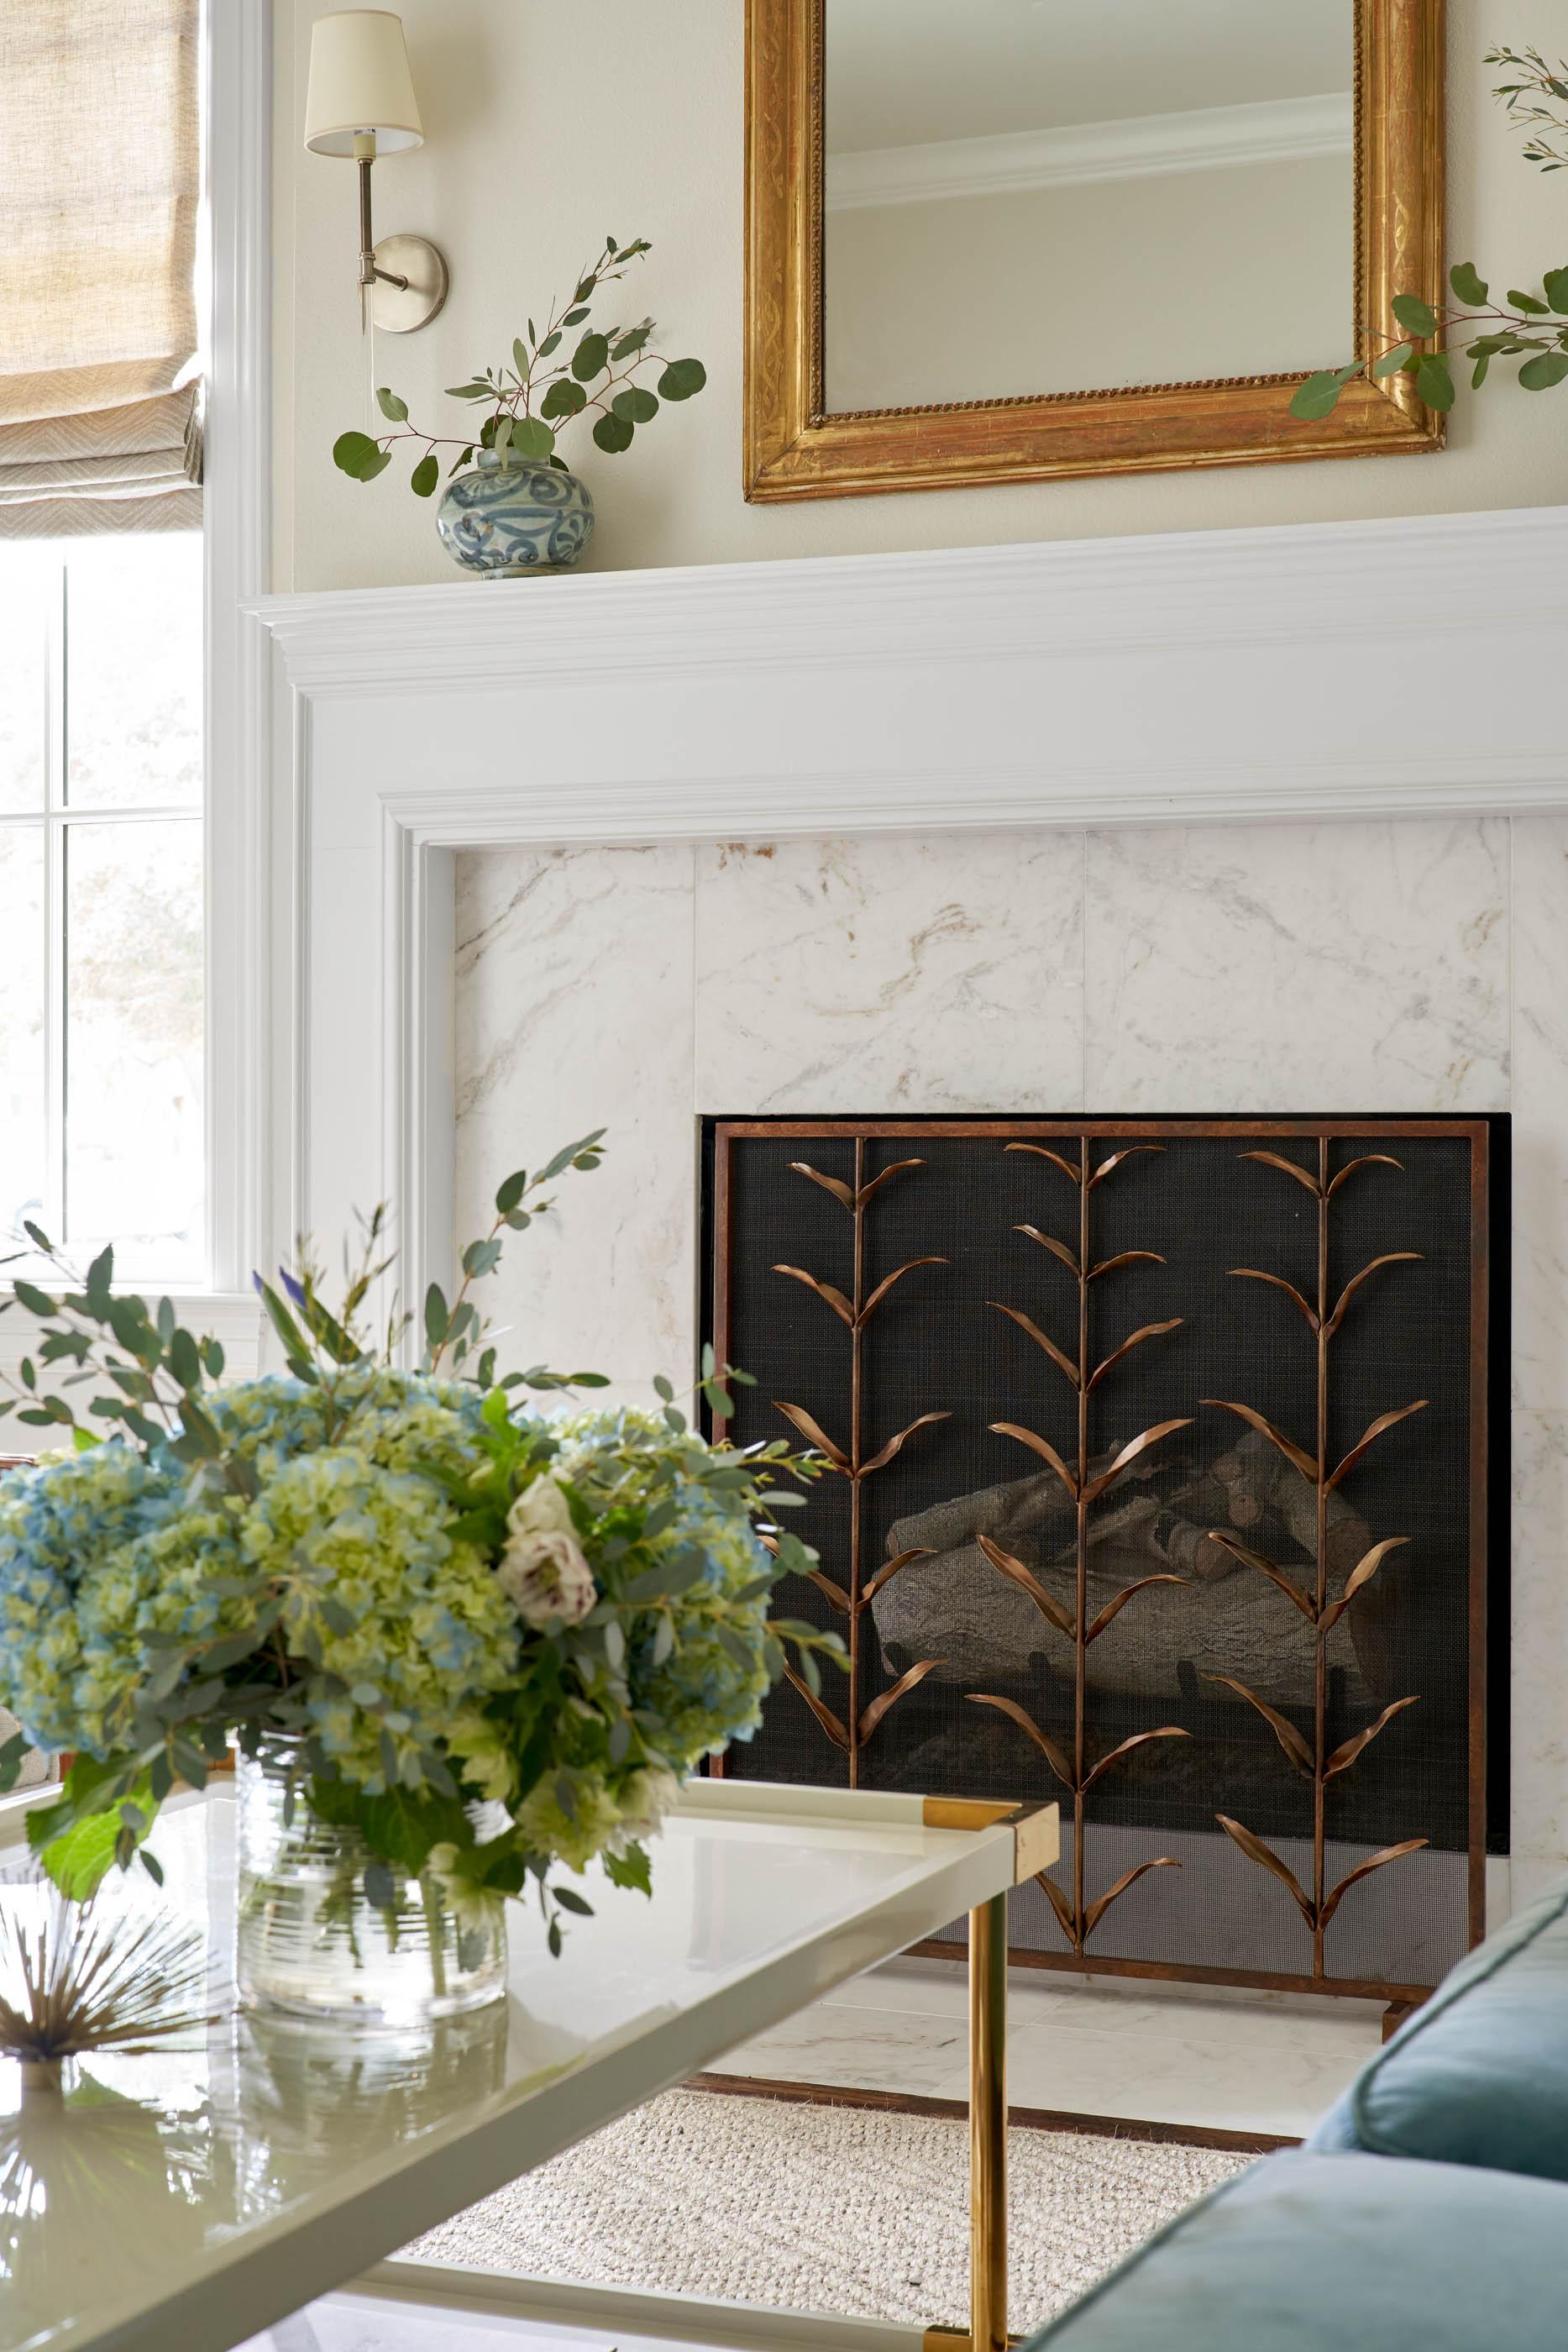 Elevating the art of the fireplace screens to new heights, the Lily Stems screen features uniquely formed leaves that seem to delicately emerge from the stems. Each leaf is formed and individually hand bent, ensuring no two are alike. The result is